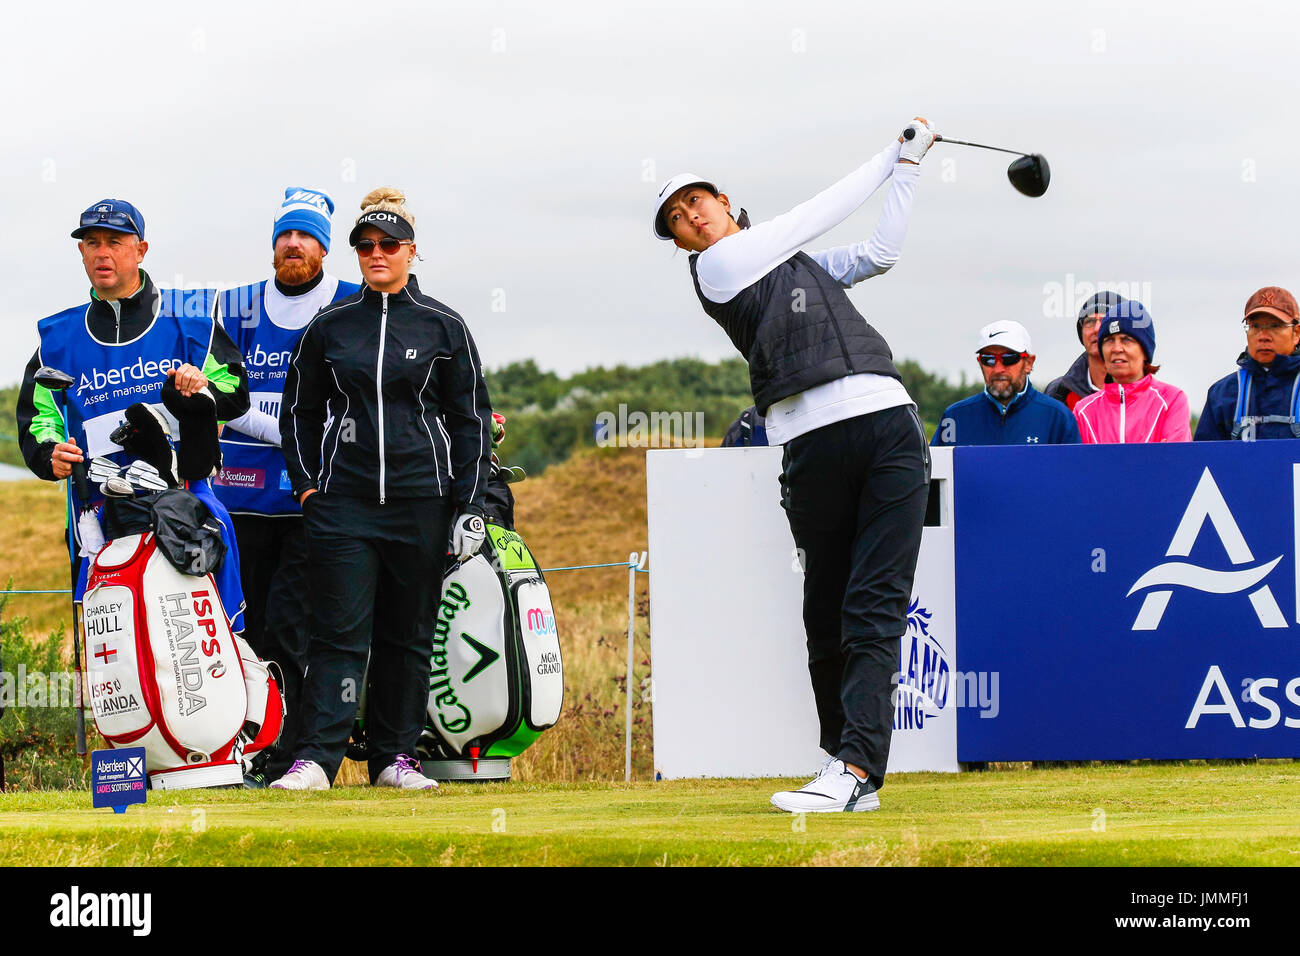 Irvine, Scotland, UK. 28th July, 2017. On the second day of the Ladies Scottish Open Championship at Dundonald Links, Irvine, Ayrshire, Scotland the weather remained testing with strong winds gusting upto 25 mph. As the players battled to keep control on their golf ball some good scores were posted and leaders starting to emerge with totals of 4, 5 and 6 under for the first two rounds. Credit: Findlay/Alamy Live News Stock Photo